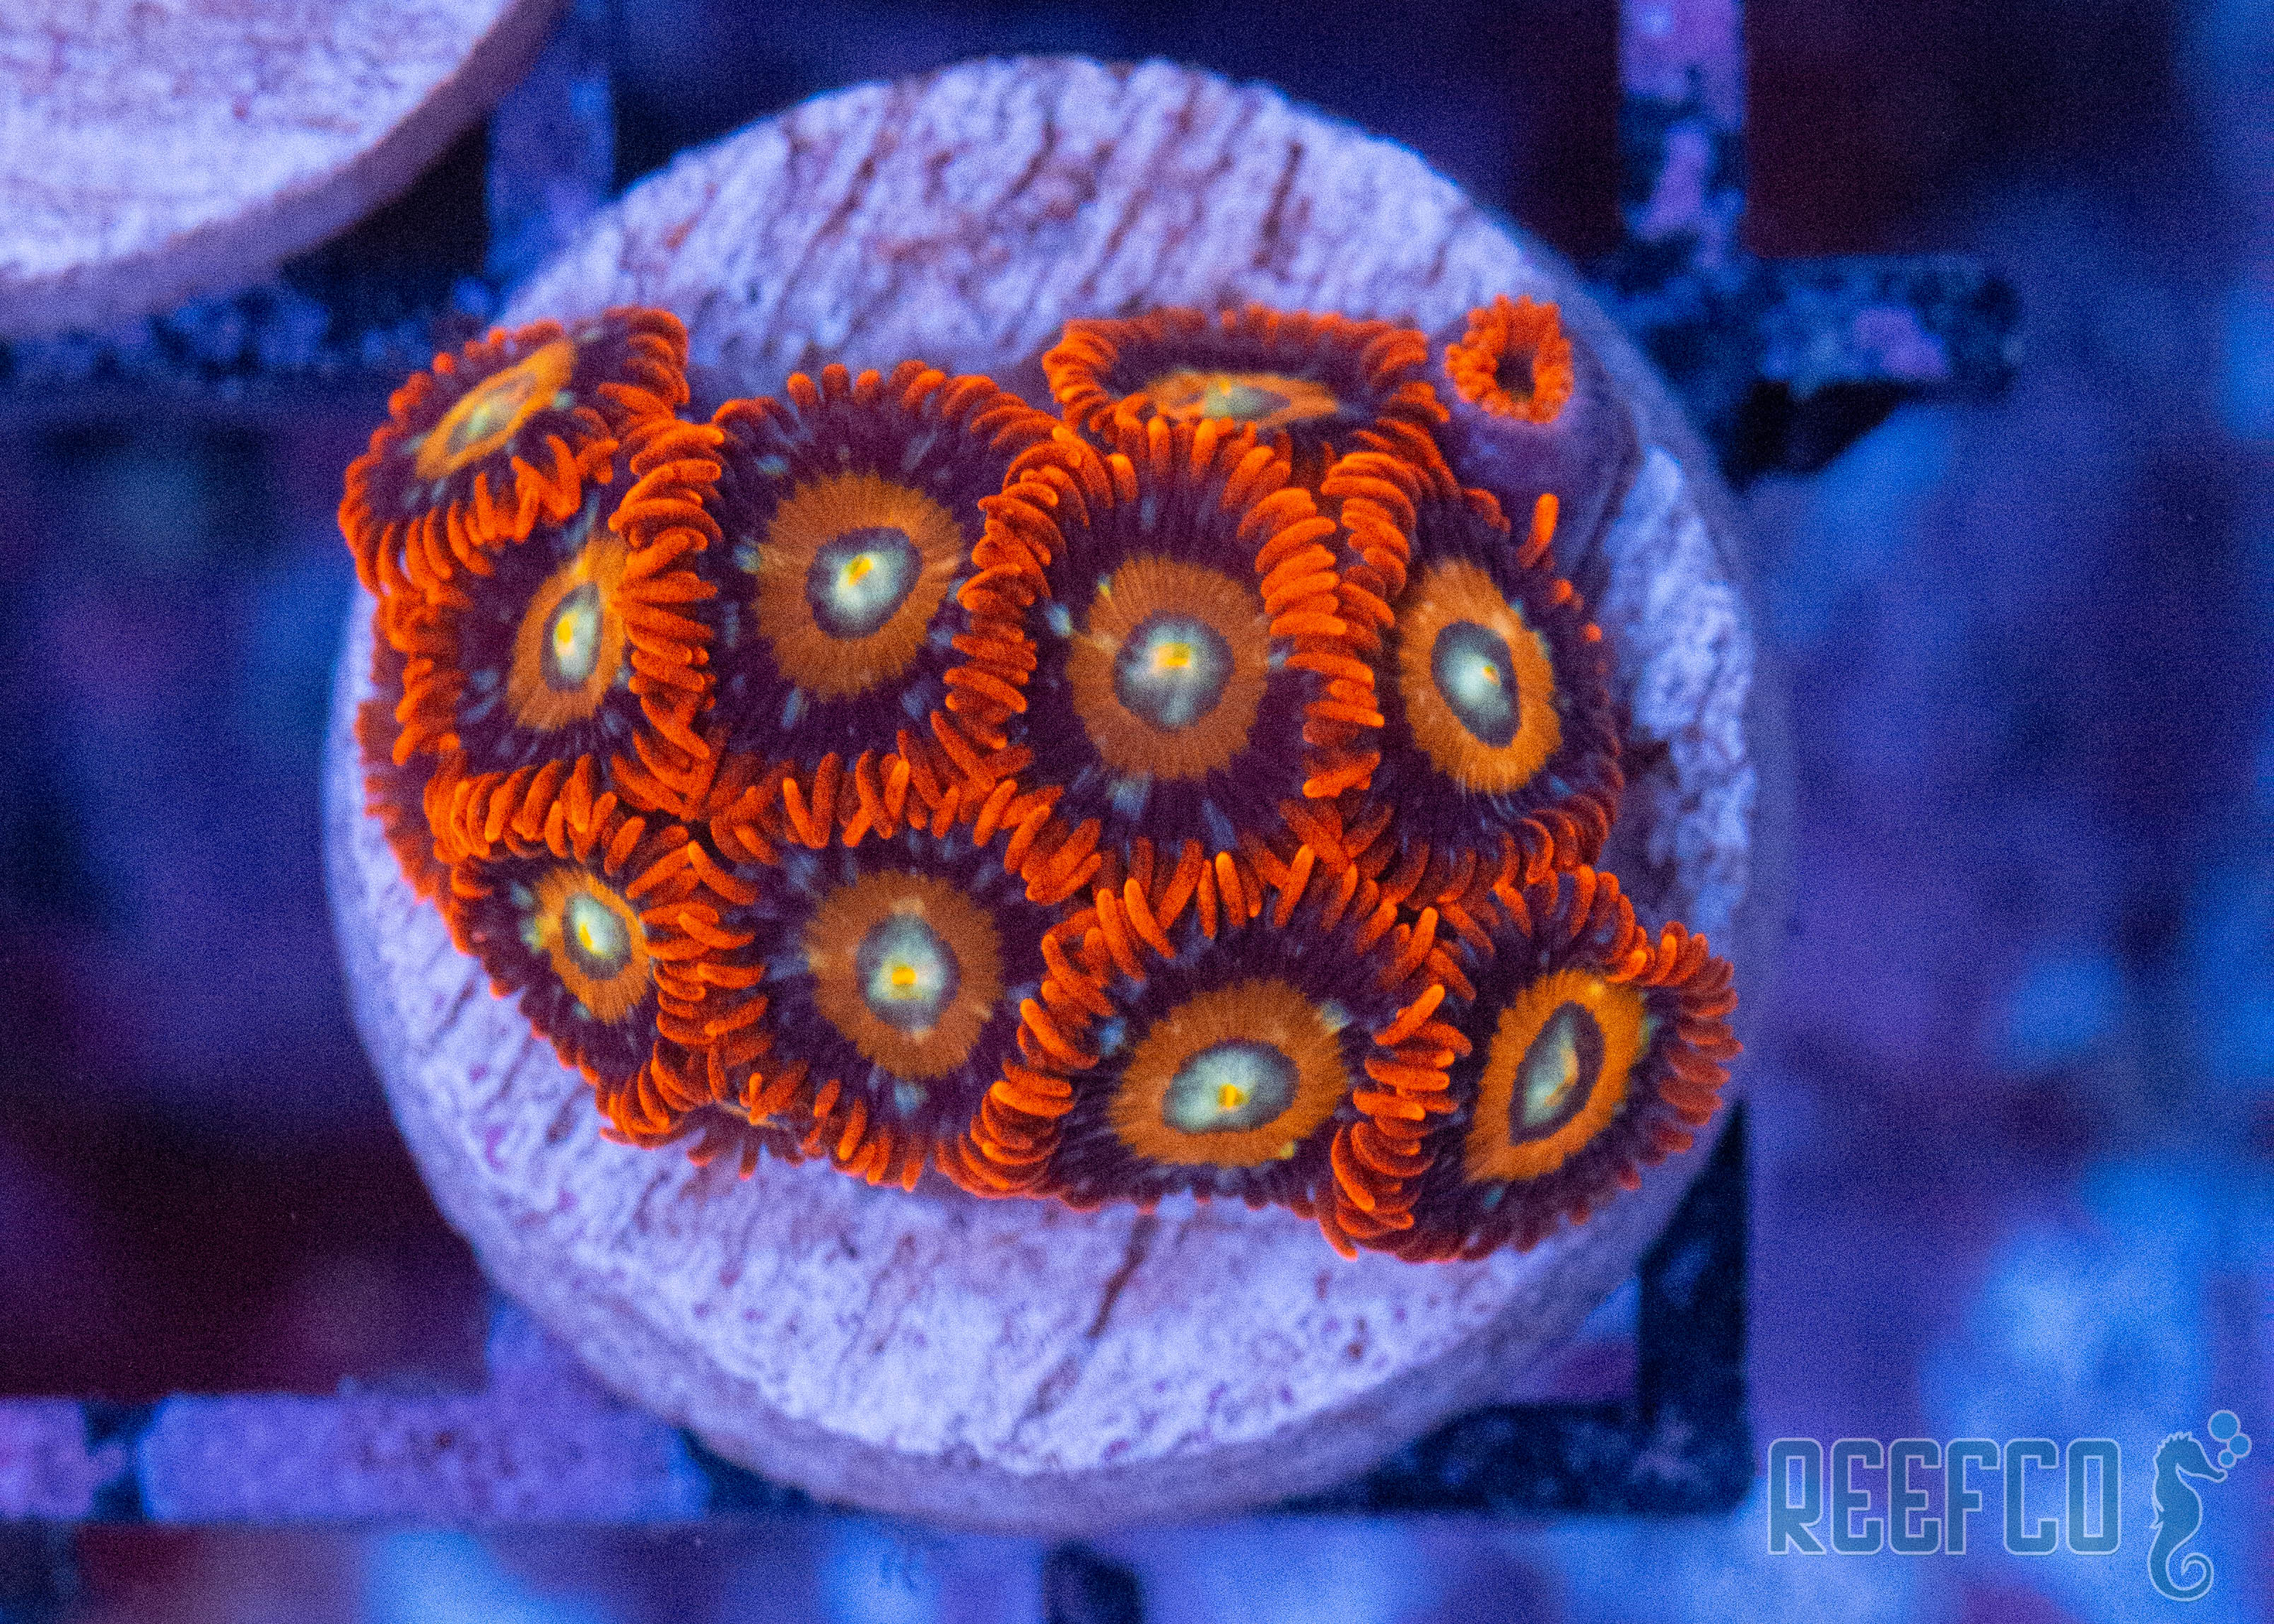 Speckeld Fire and Ice Zoanthids